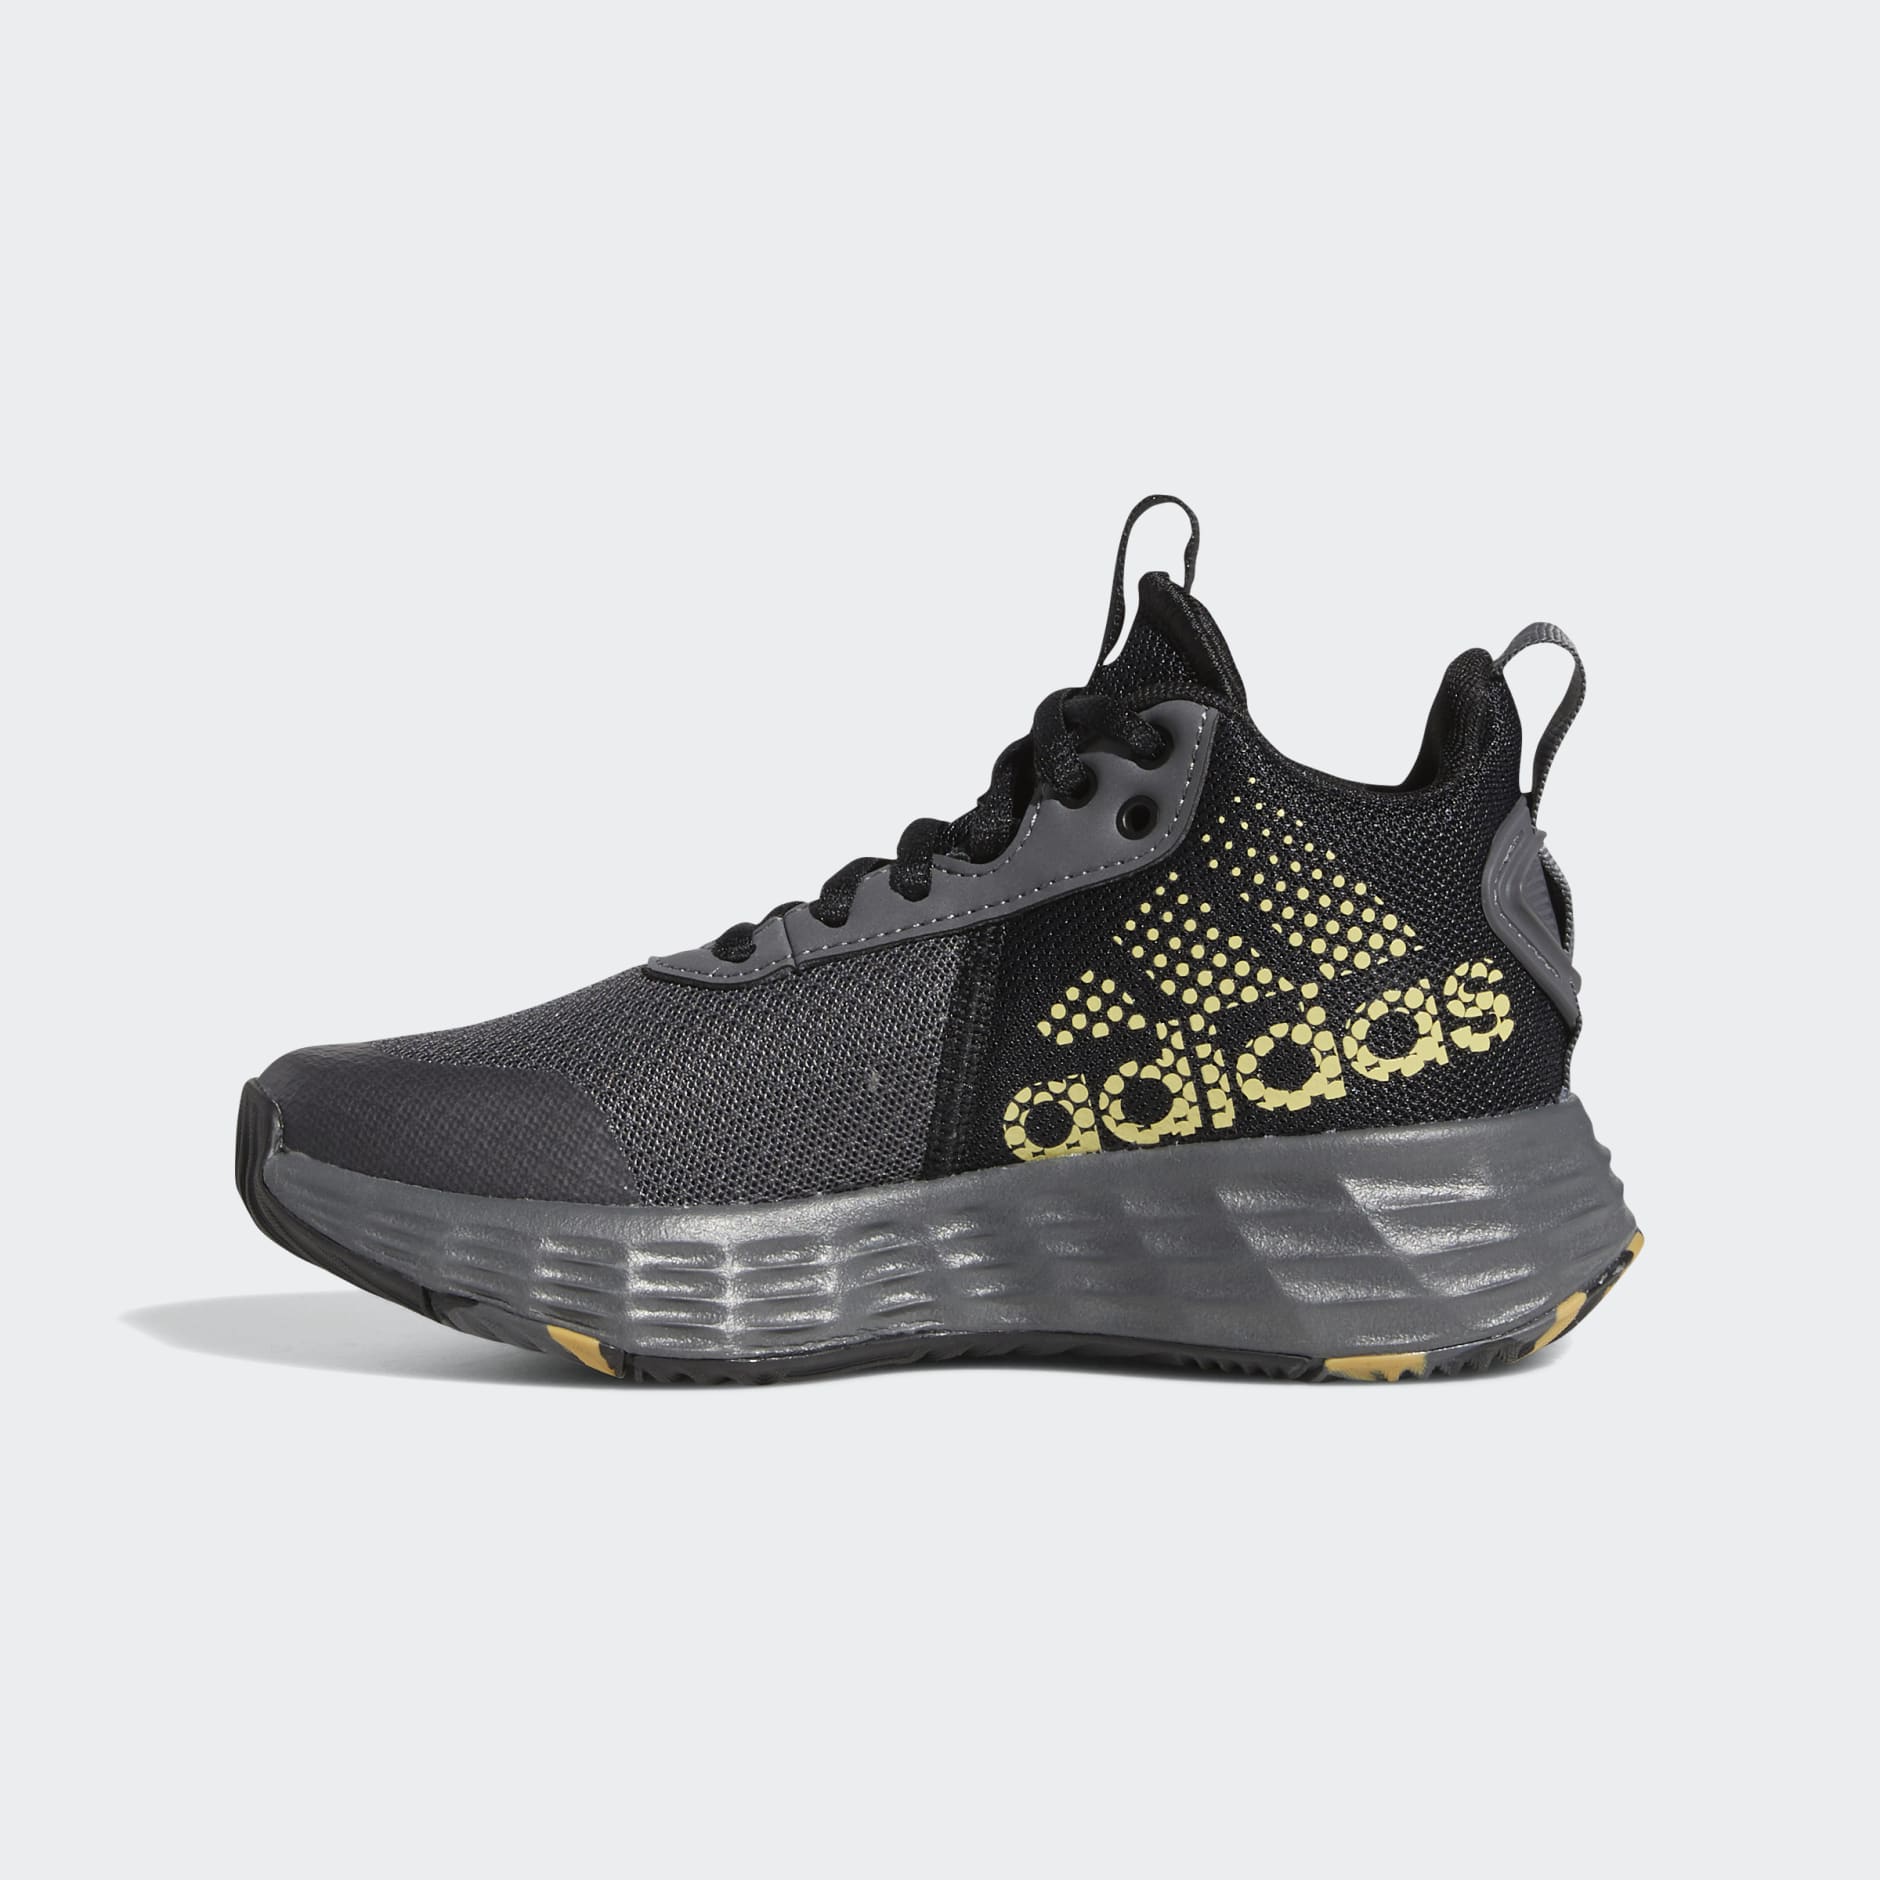 | Ownthegame Shoes 2.0 adidas GH adidas - Grey